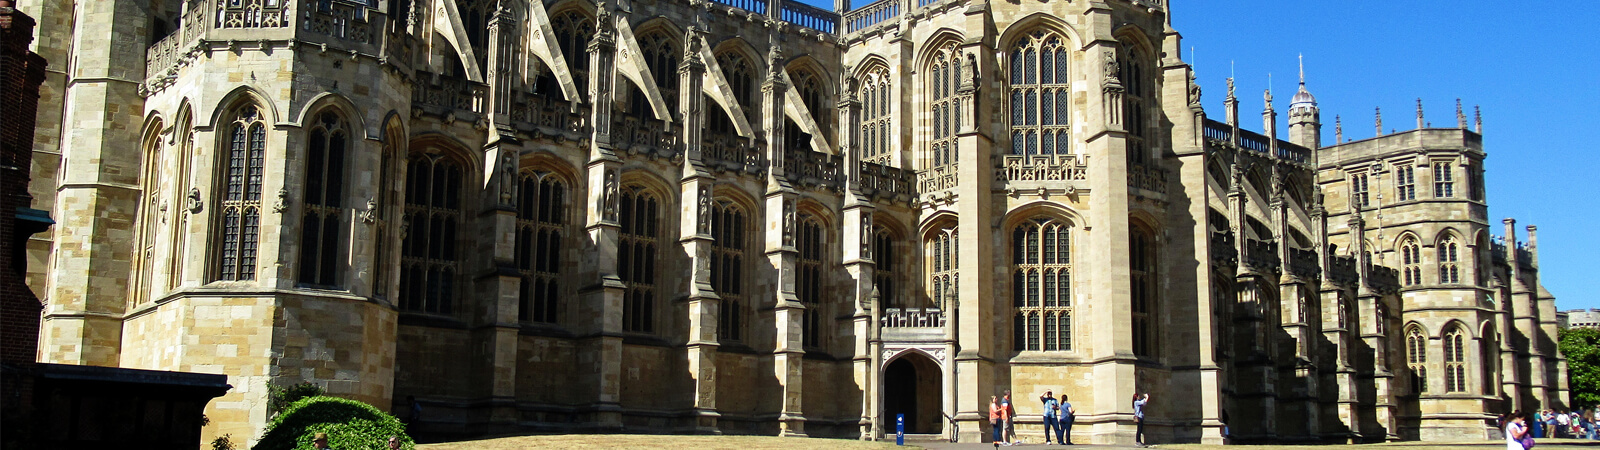 Experience A New Extended Windsor Castle And Stonehenge Tour